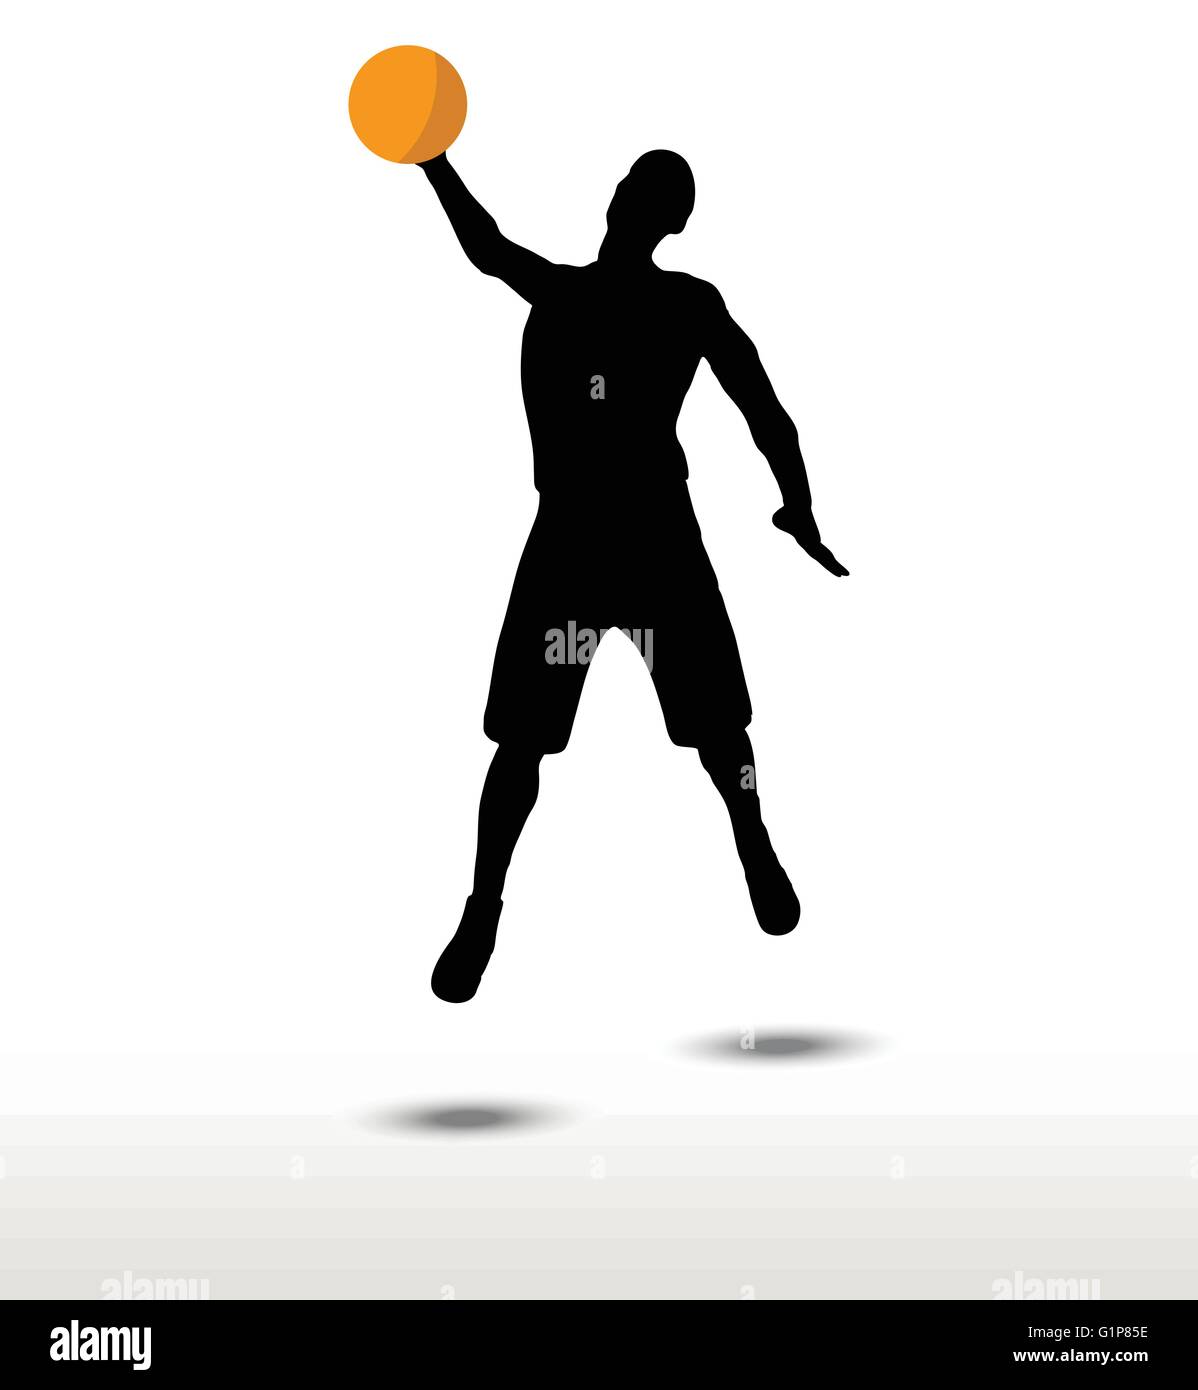 vector image - basketball player silhouette in slam pose, isolated on ...